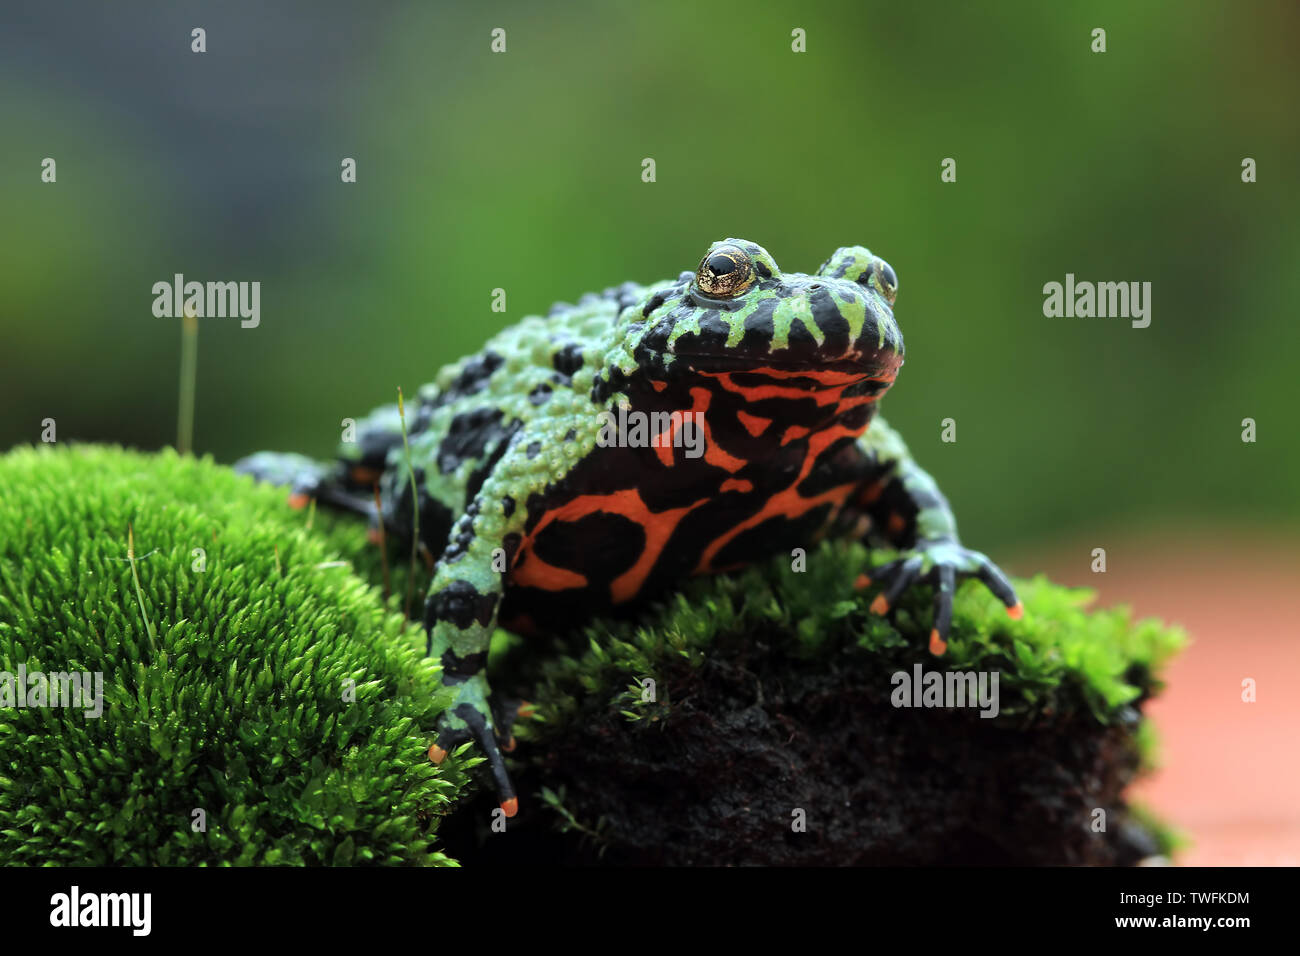 Fire-bellied toad  (Bombina orientalis) on moss covered rocks, Indonesia Stock Photo